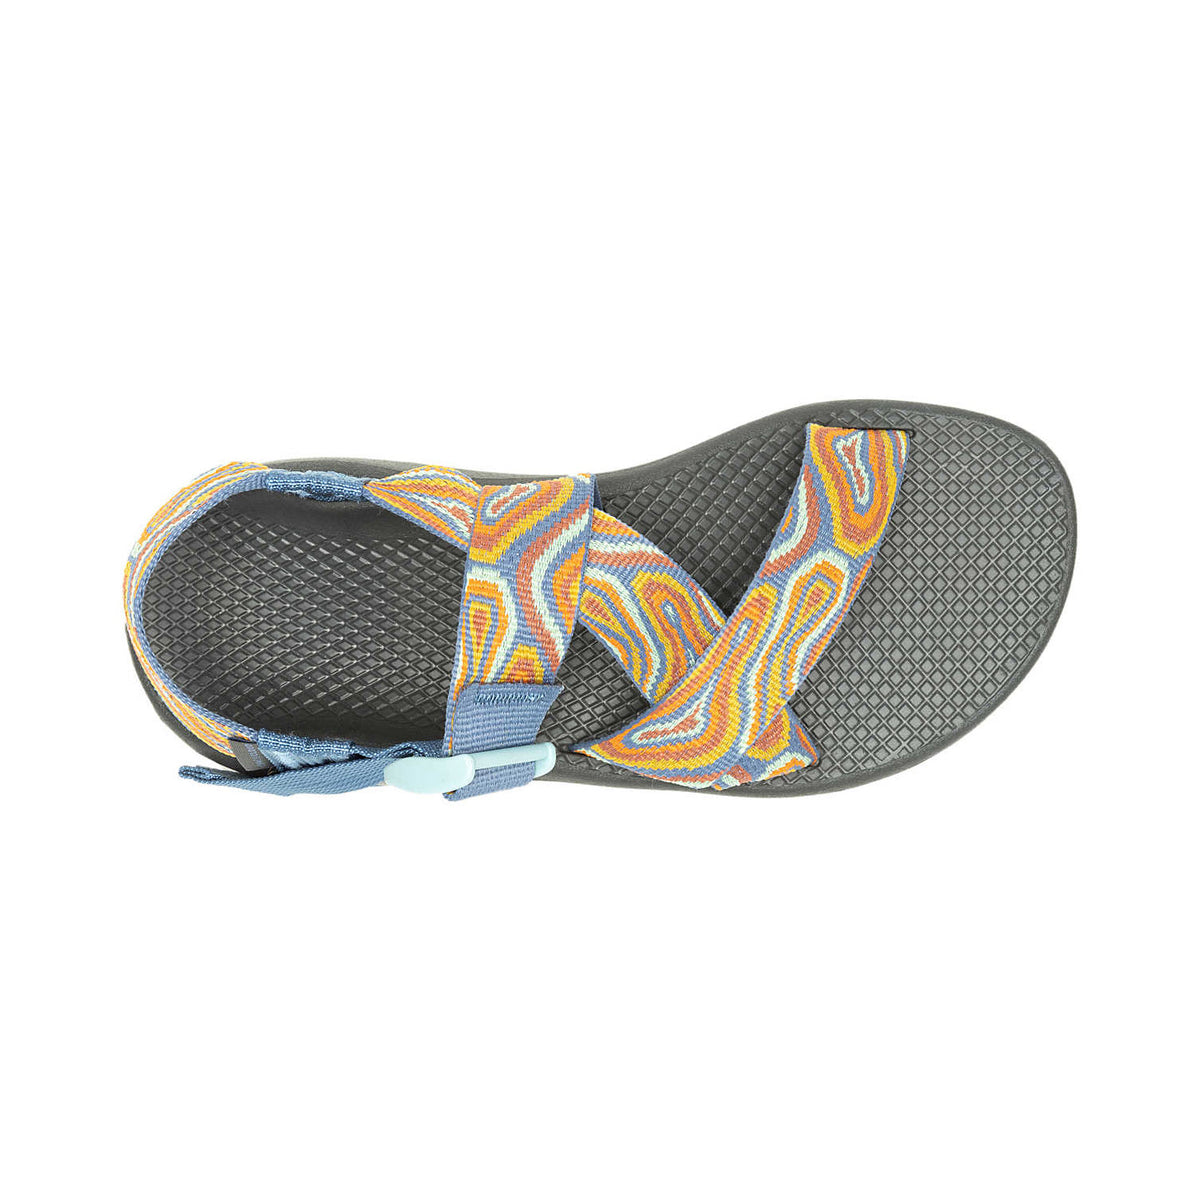 Top view of a colorful, patterned sandal with a Chaco LUVSEAT footbed and Velcro strap on a white background.